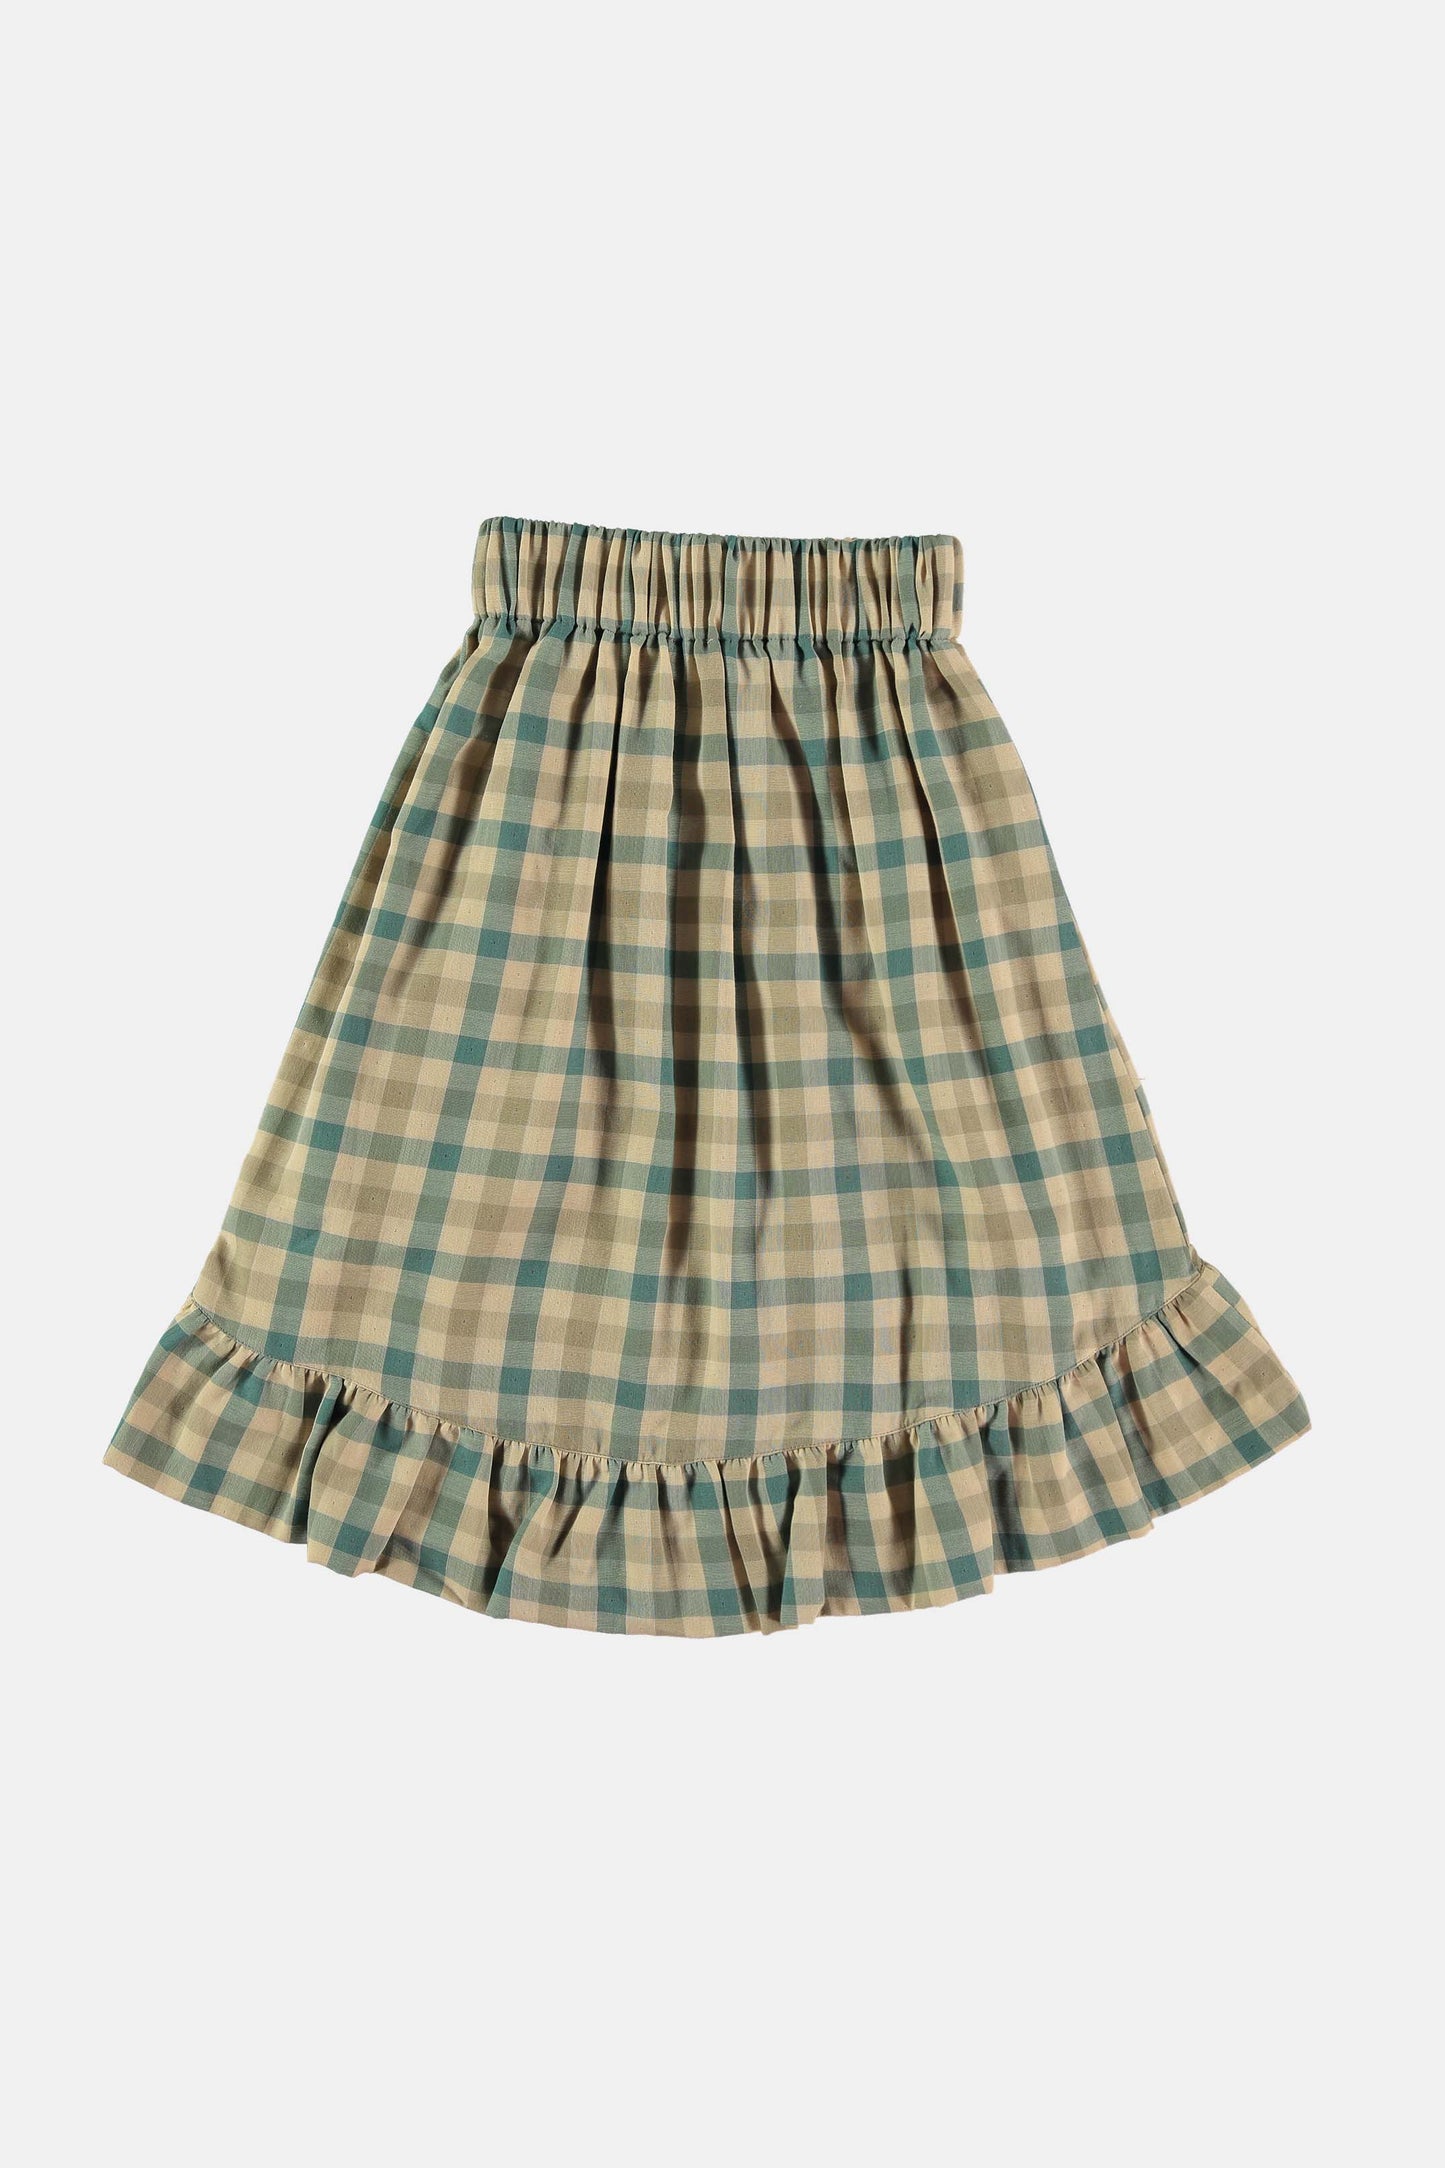 Moss agate woven long skirt Skirts Coco au lait 